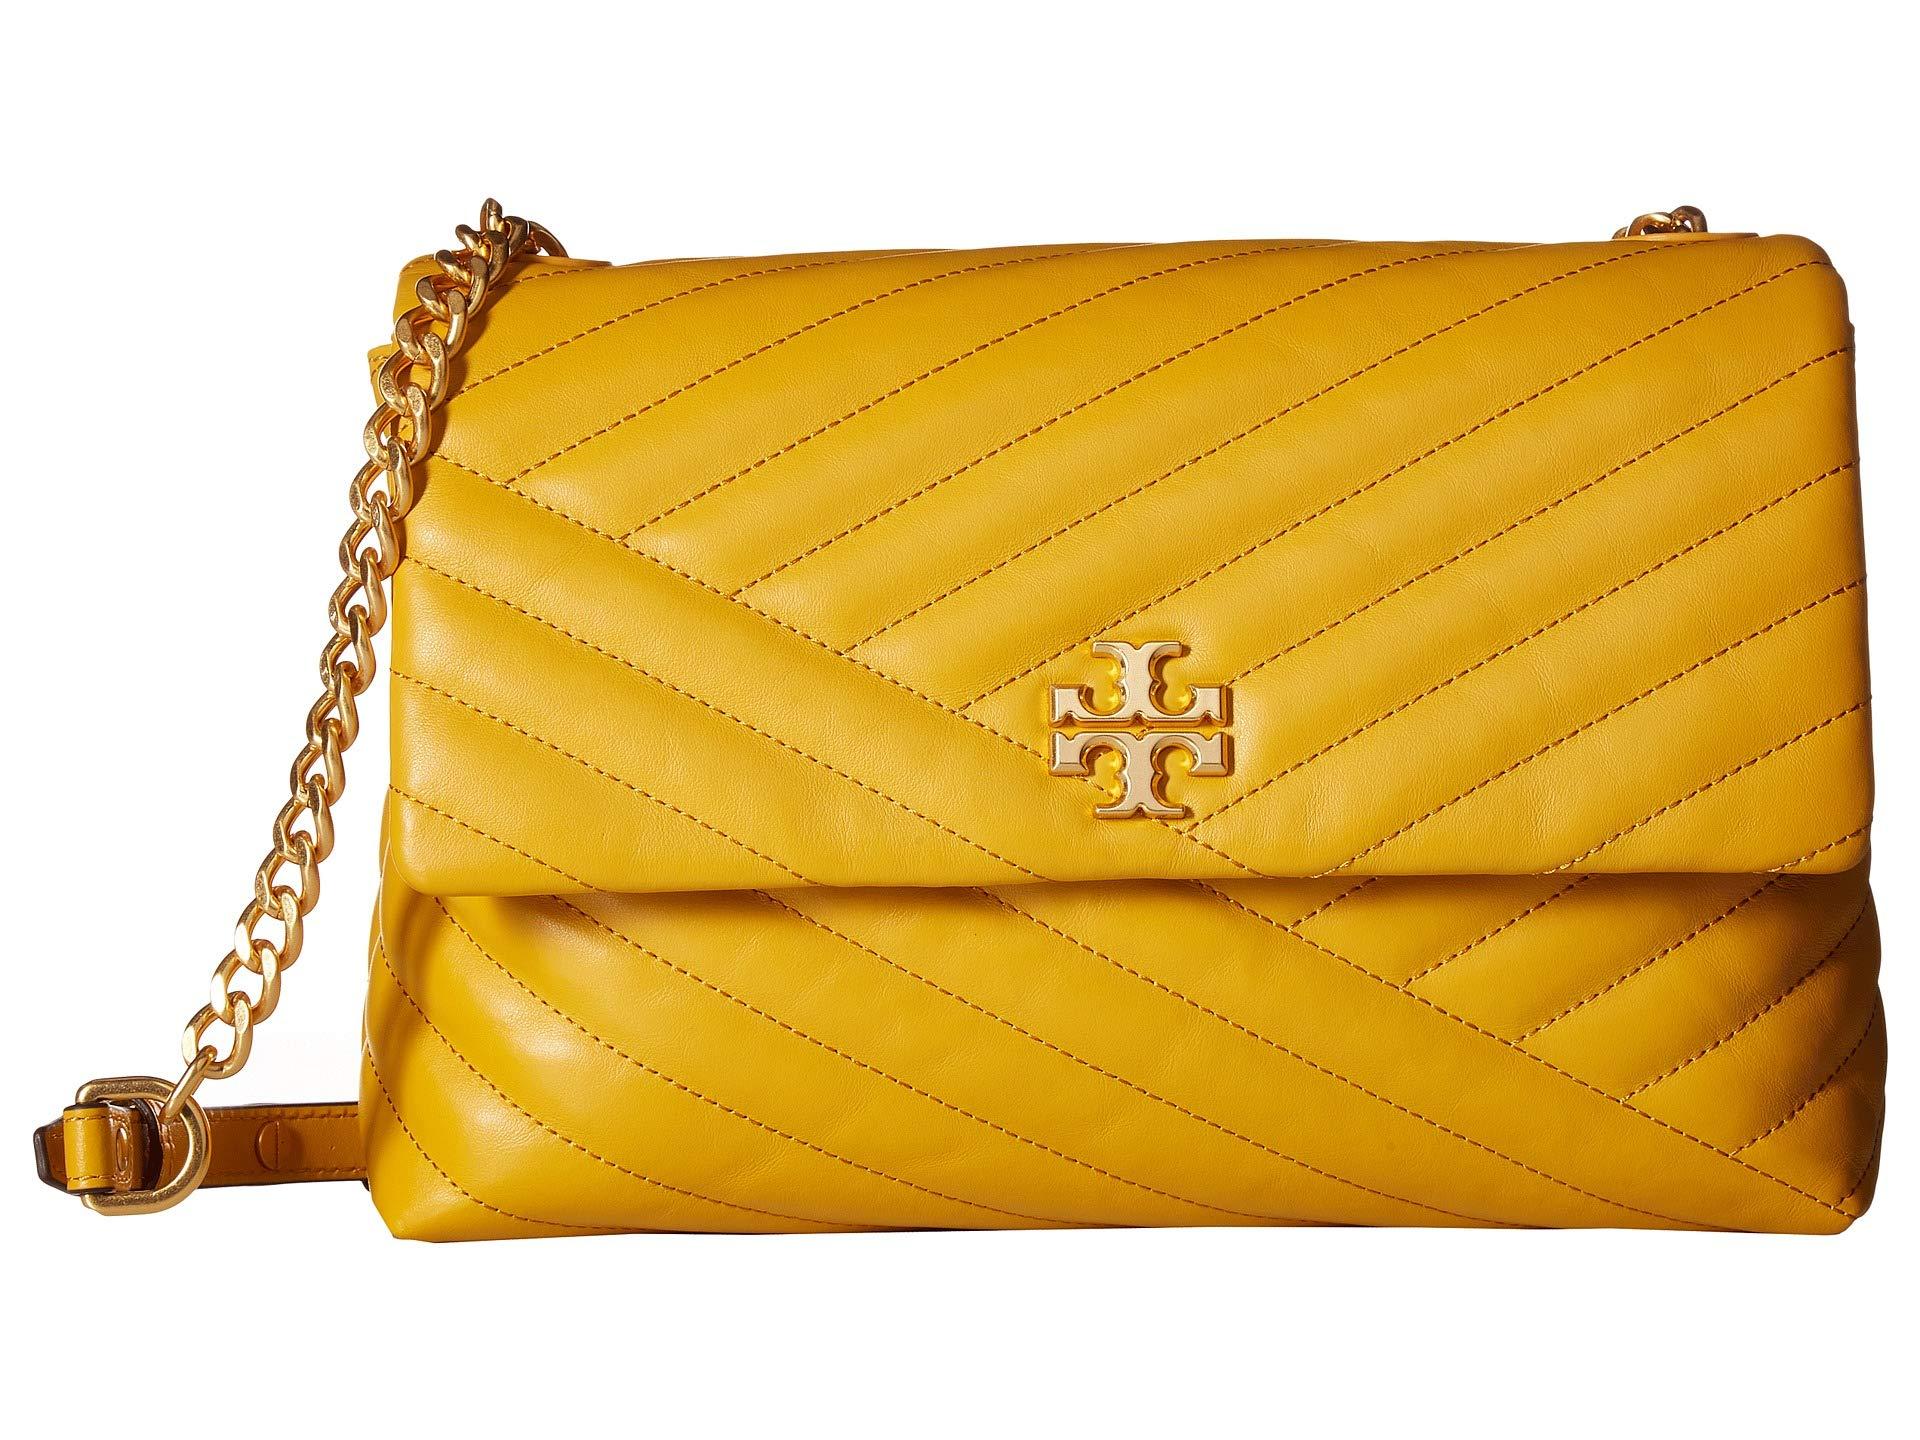 Tory Burch Kira Chevron Small Flap Shoulder Bag in Sycamore /Rolled Gold  $458